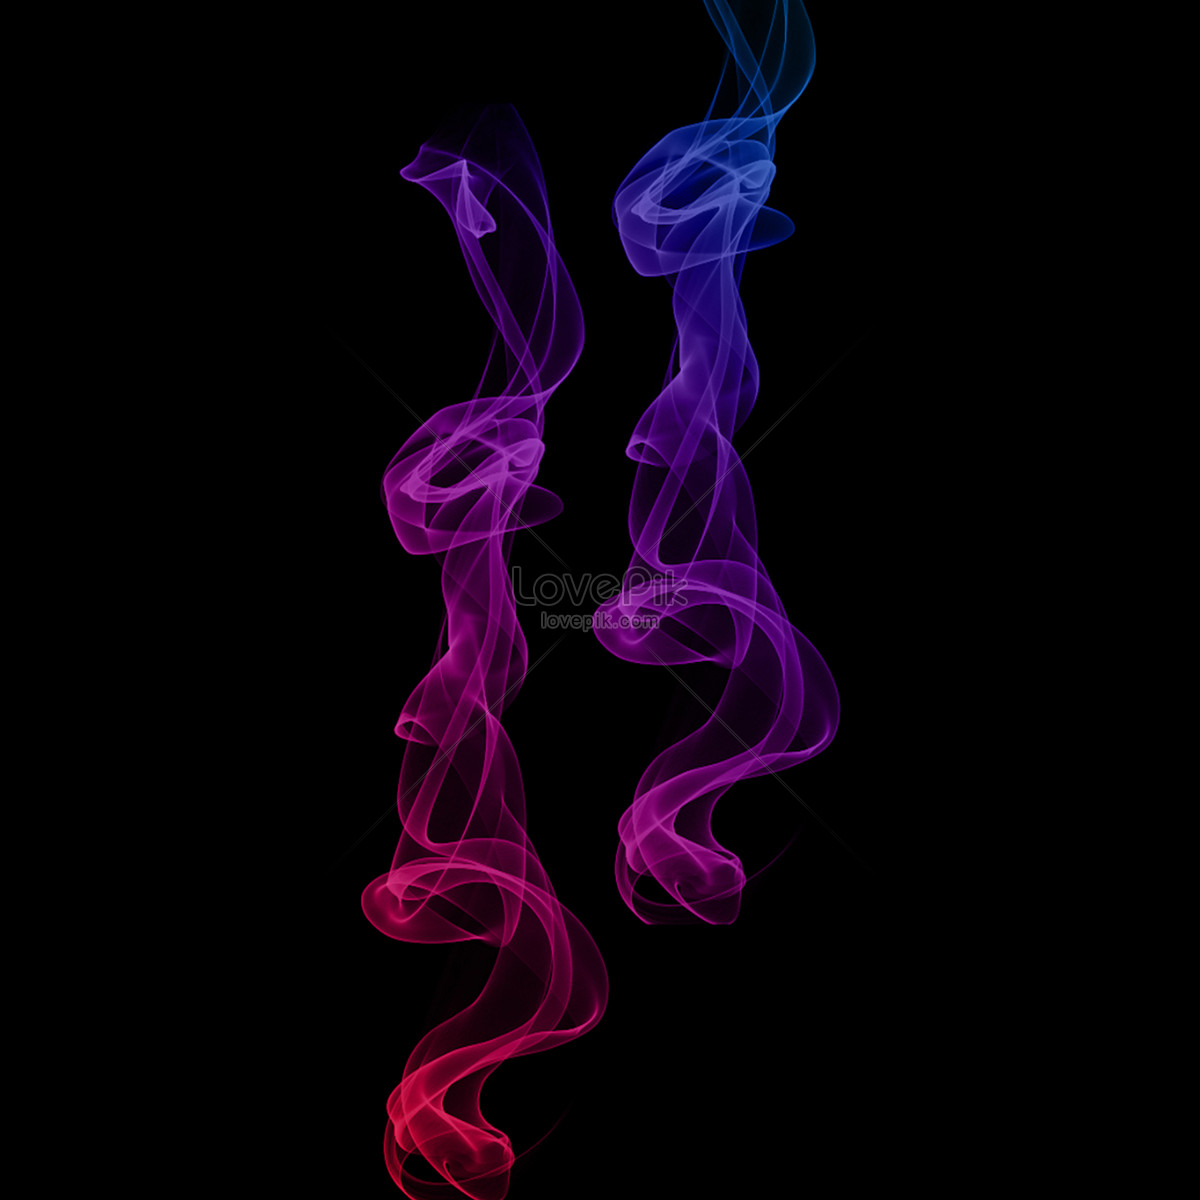 Pink And Blue Smoke Background Download Free | Banner Background Image on  Lovepik | 450012959